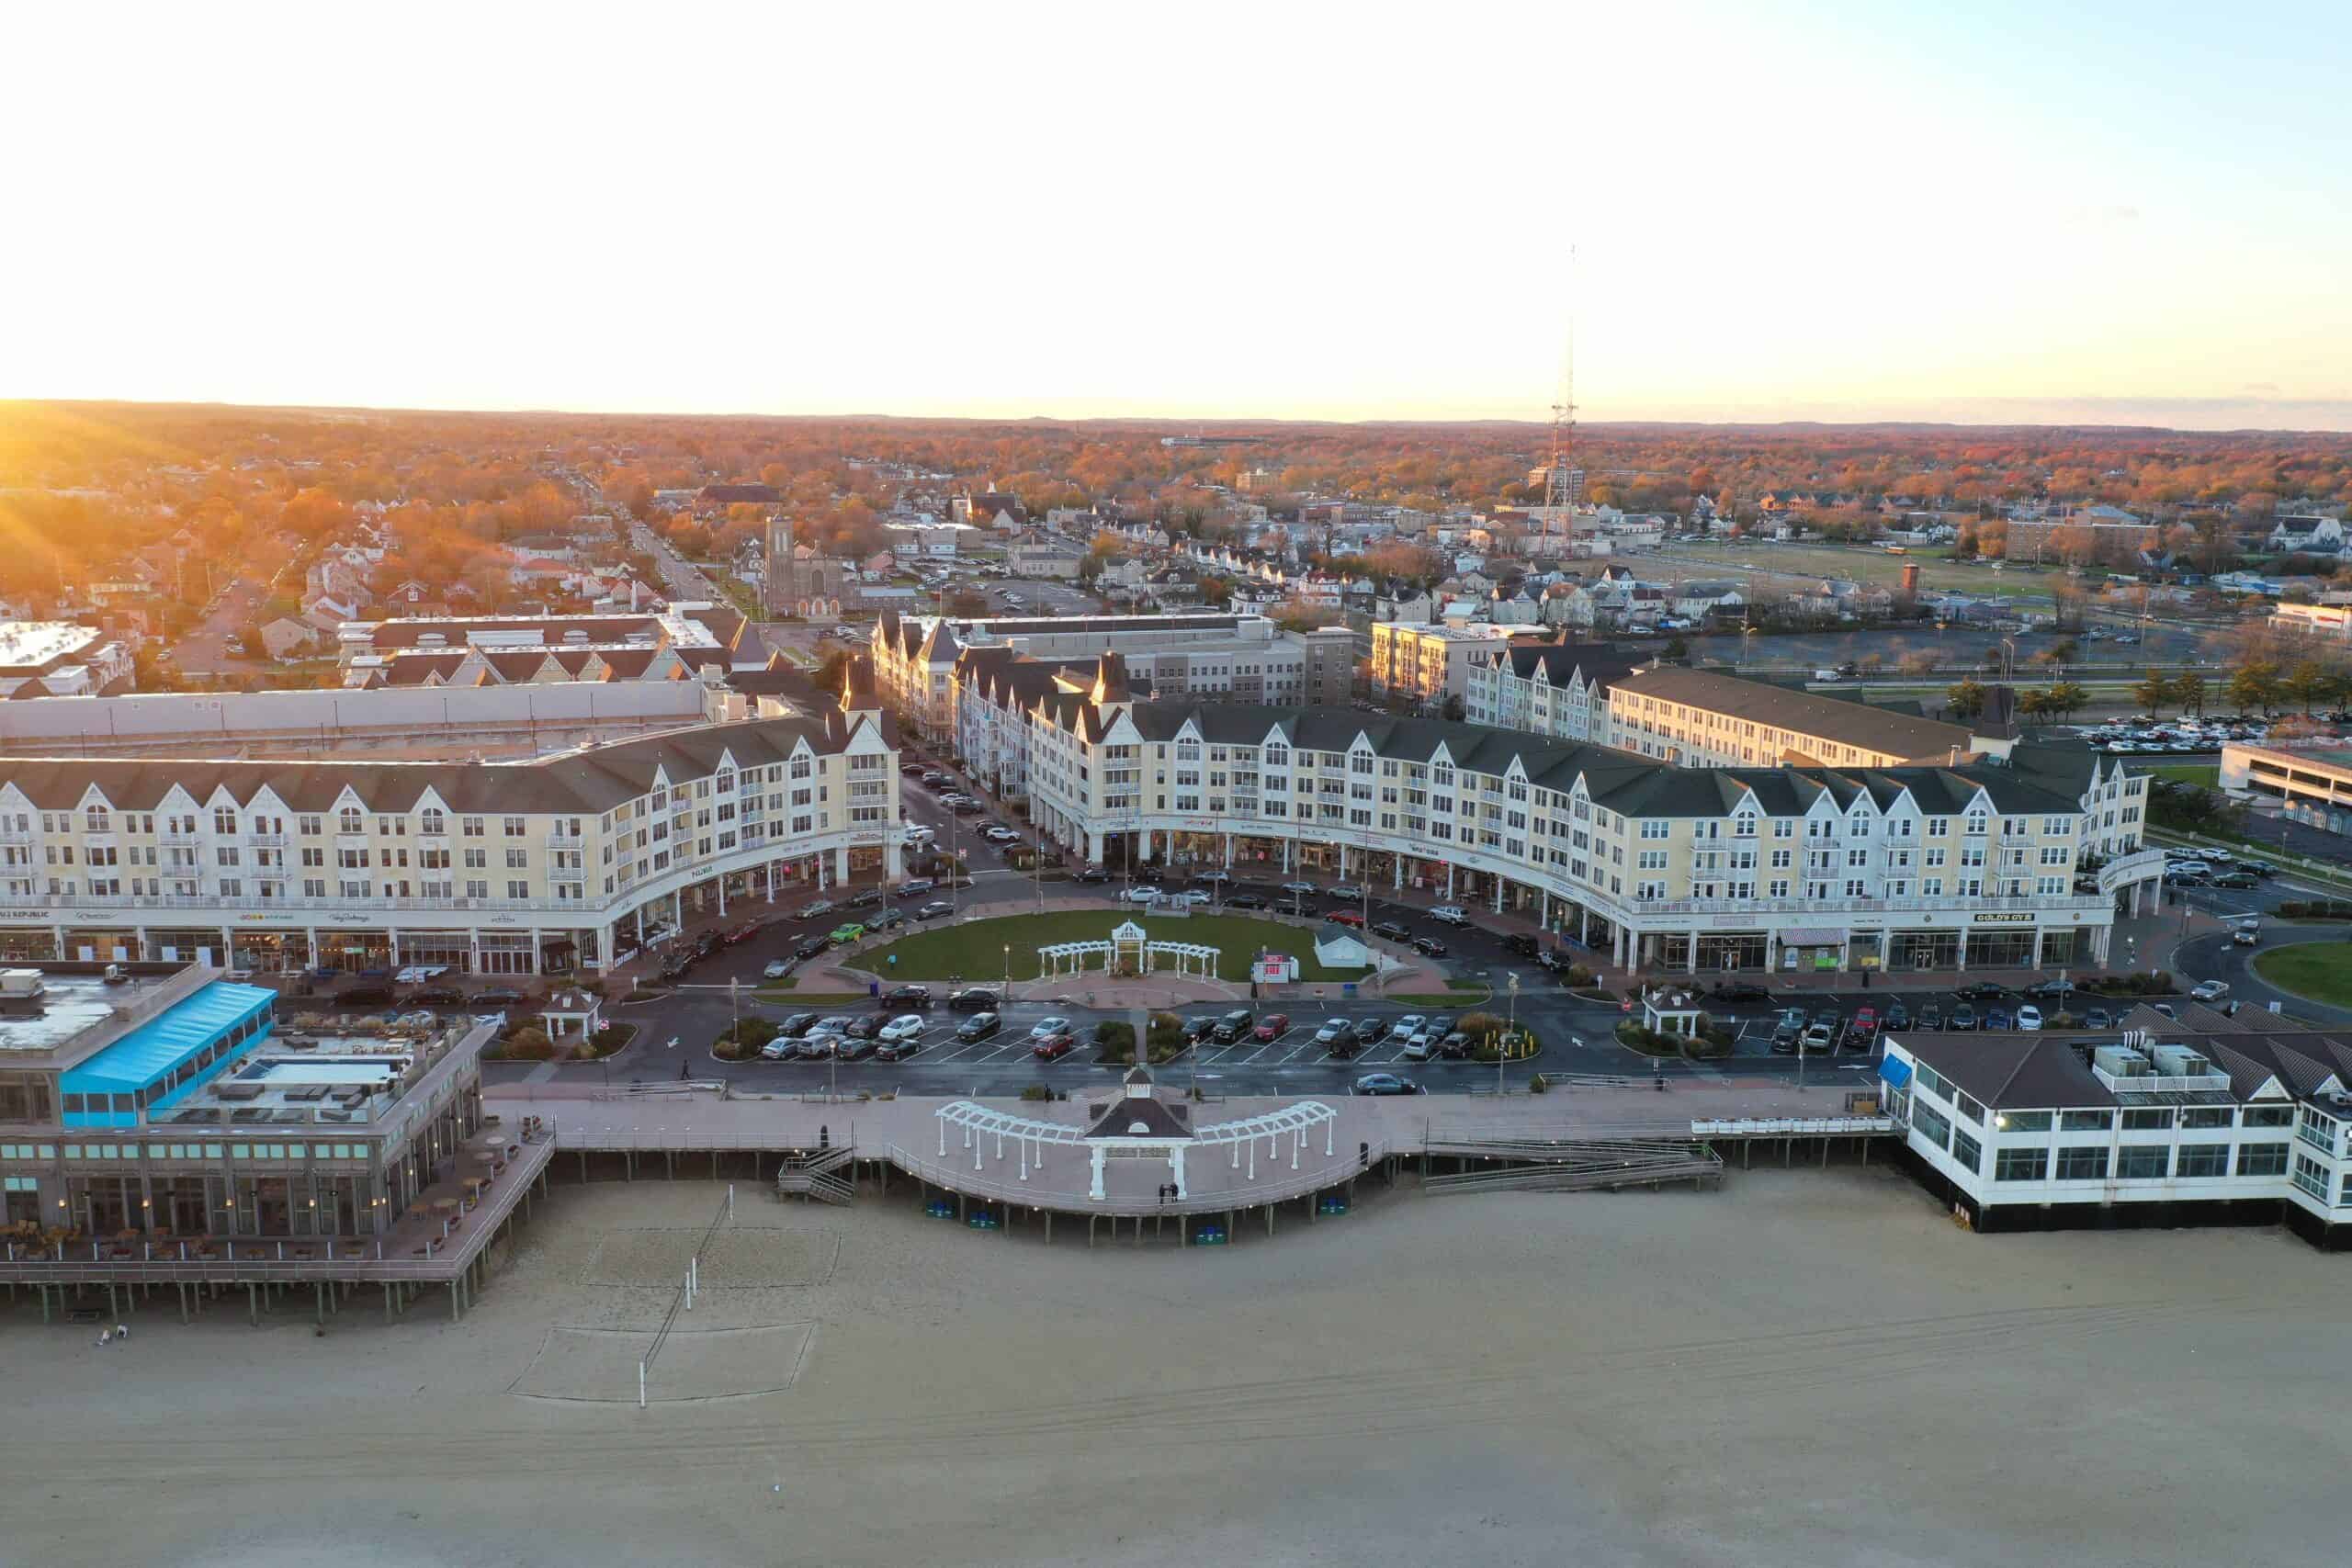 Long Branch, New Jersey | Drone shot of the Pier Village neighborhood on the coast of Long Branch, New Jersey, at sunset